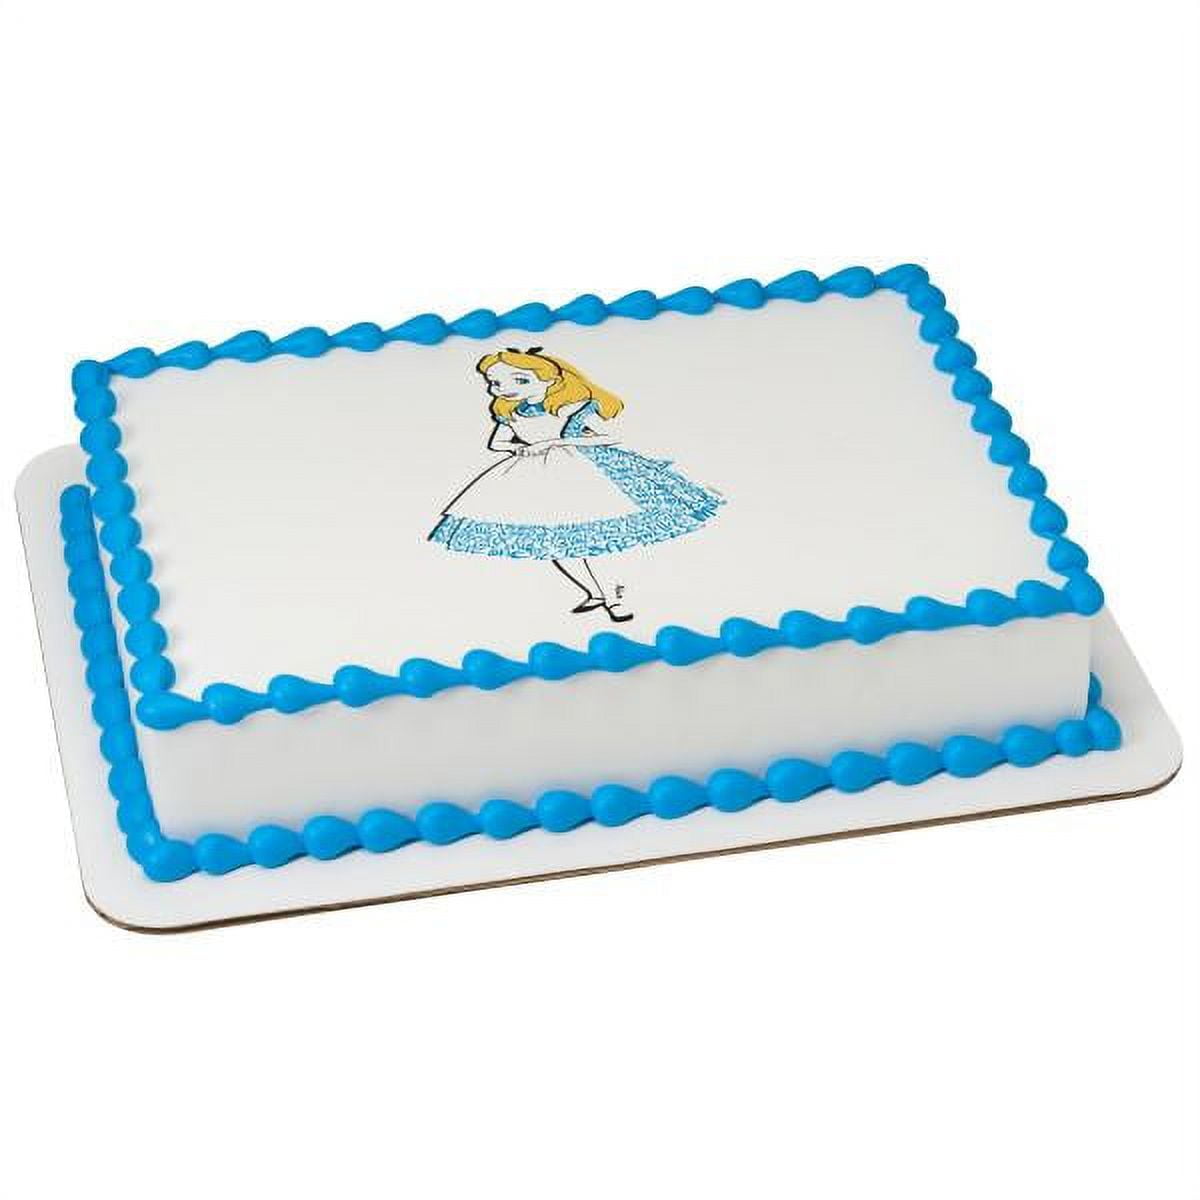 Cakecery Alice in Wonderland Edible Cake Image Topper Personalized Birthday  Cake Banner 1/4 Sheet